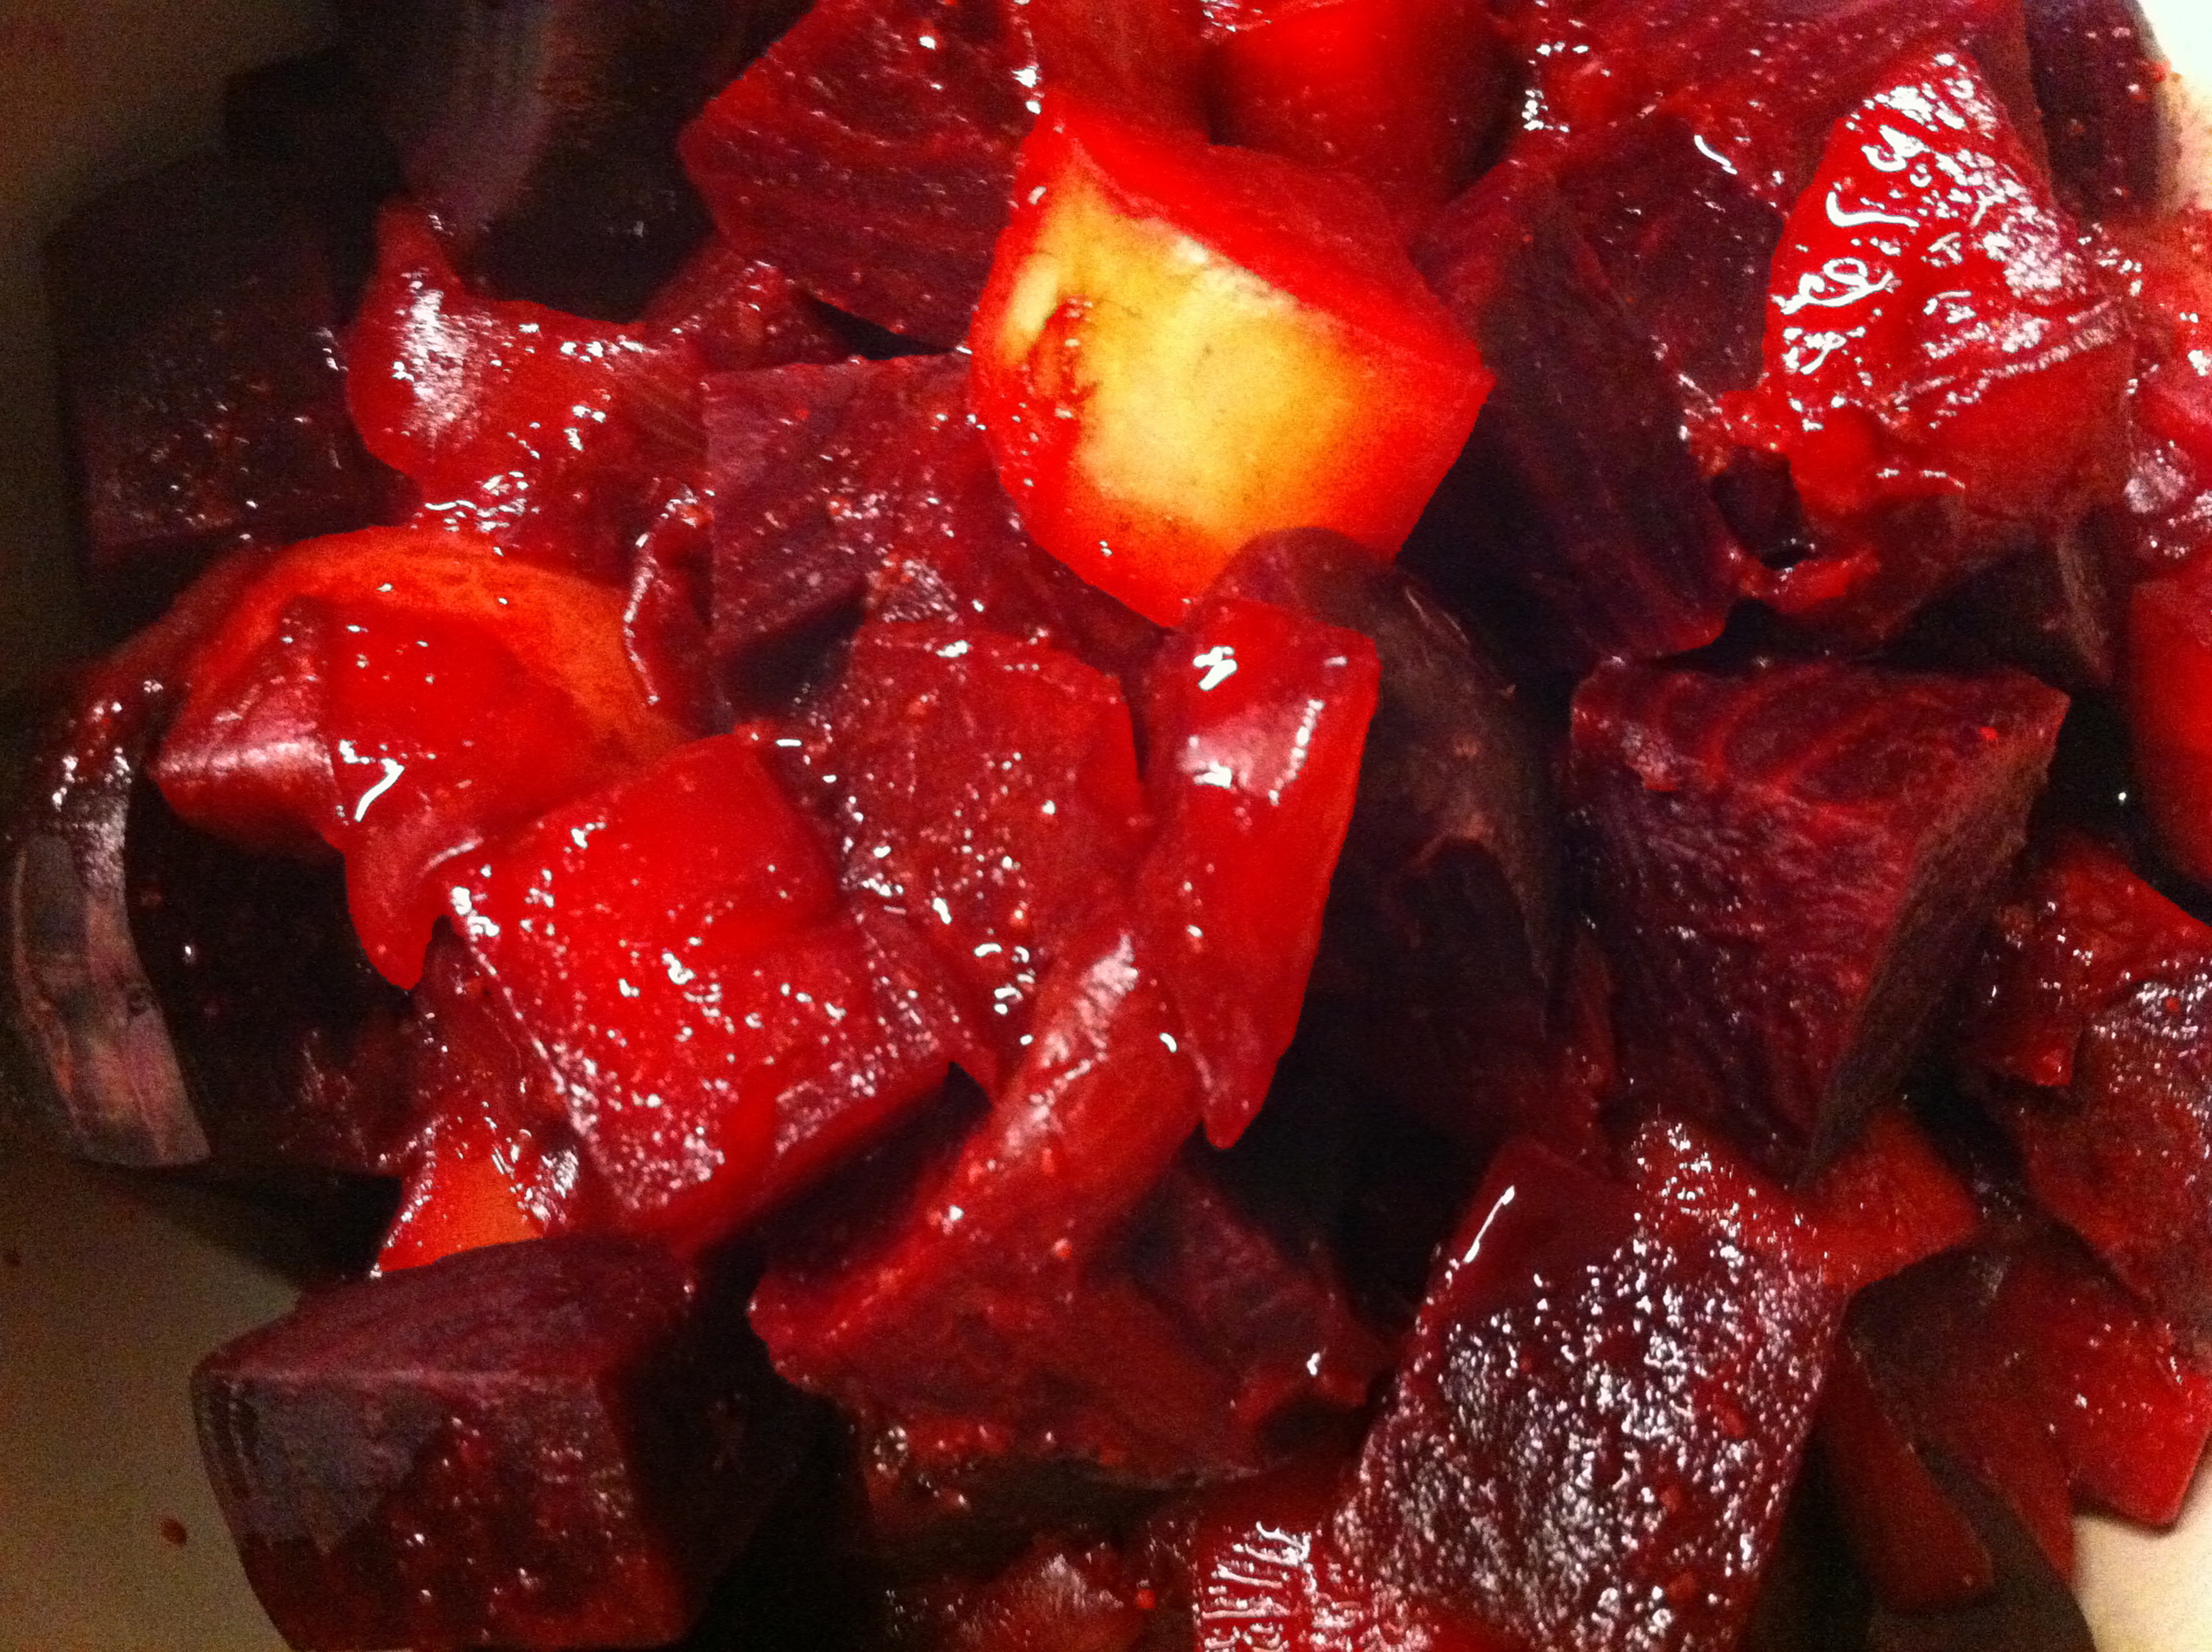 Nishime beets are a healthy addition to any meal.